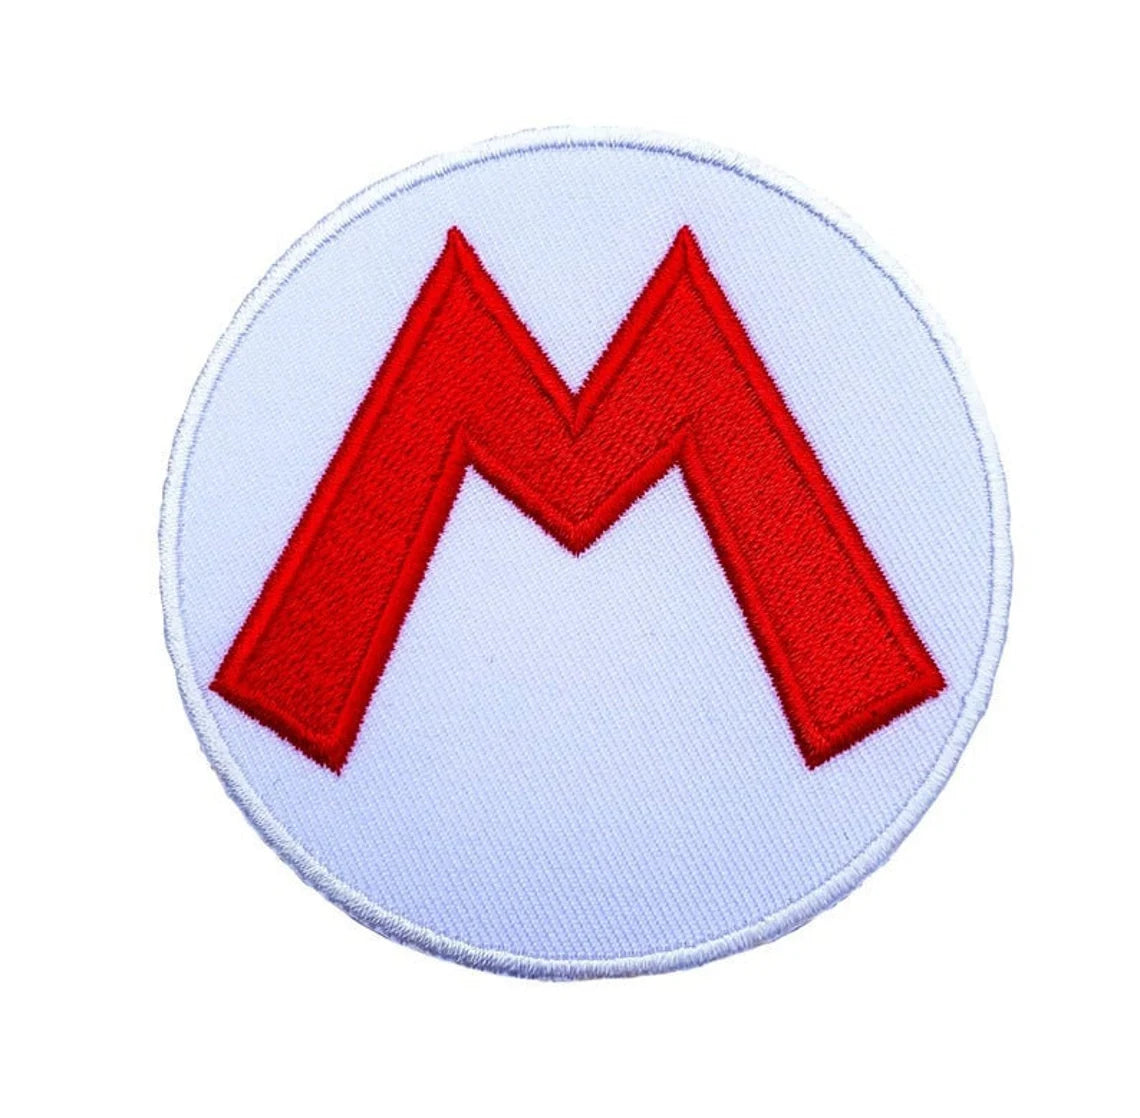 Mario + Luigi Logo Patch (3 Inch) Super Mario Brothers Iron or Sew-on Badges Costume Patches